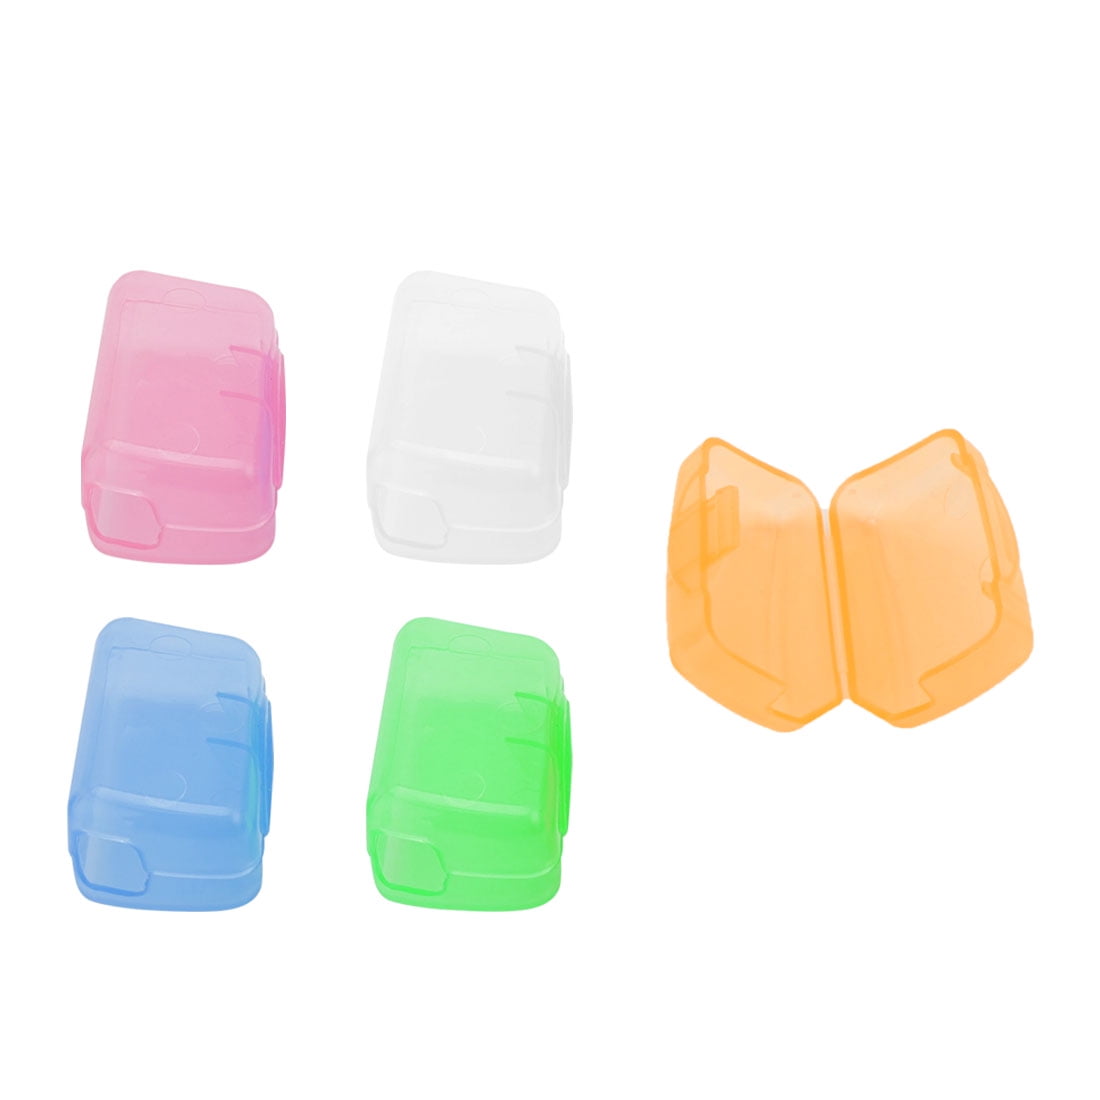 5PCS Toothbrush Head Cover Case Cap Travel Hike Camping Brush Cleaner Protect 